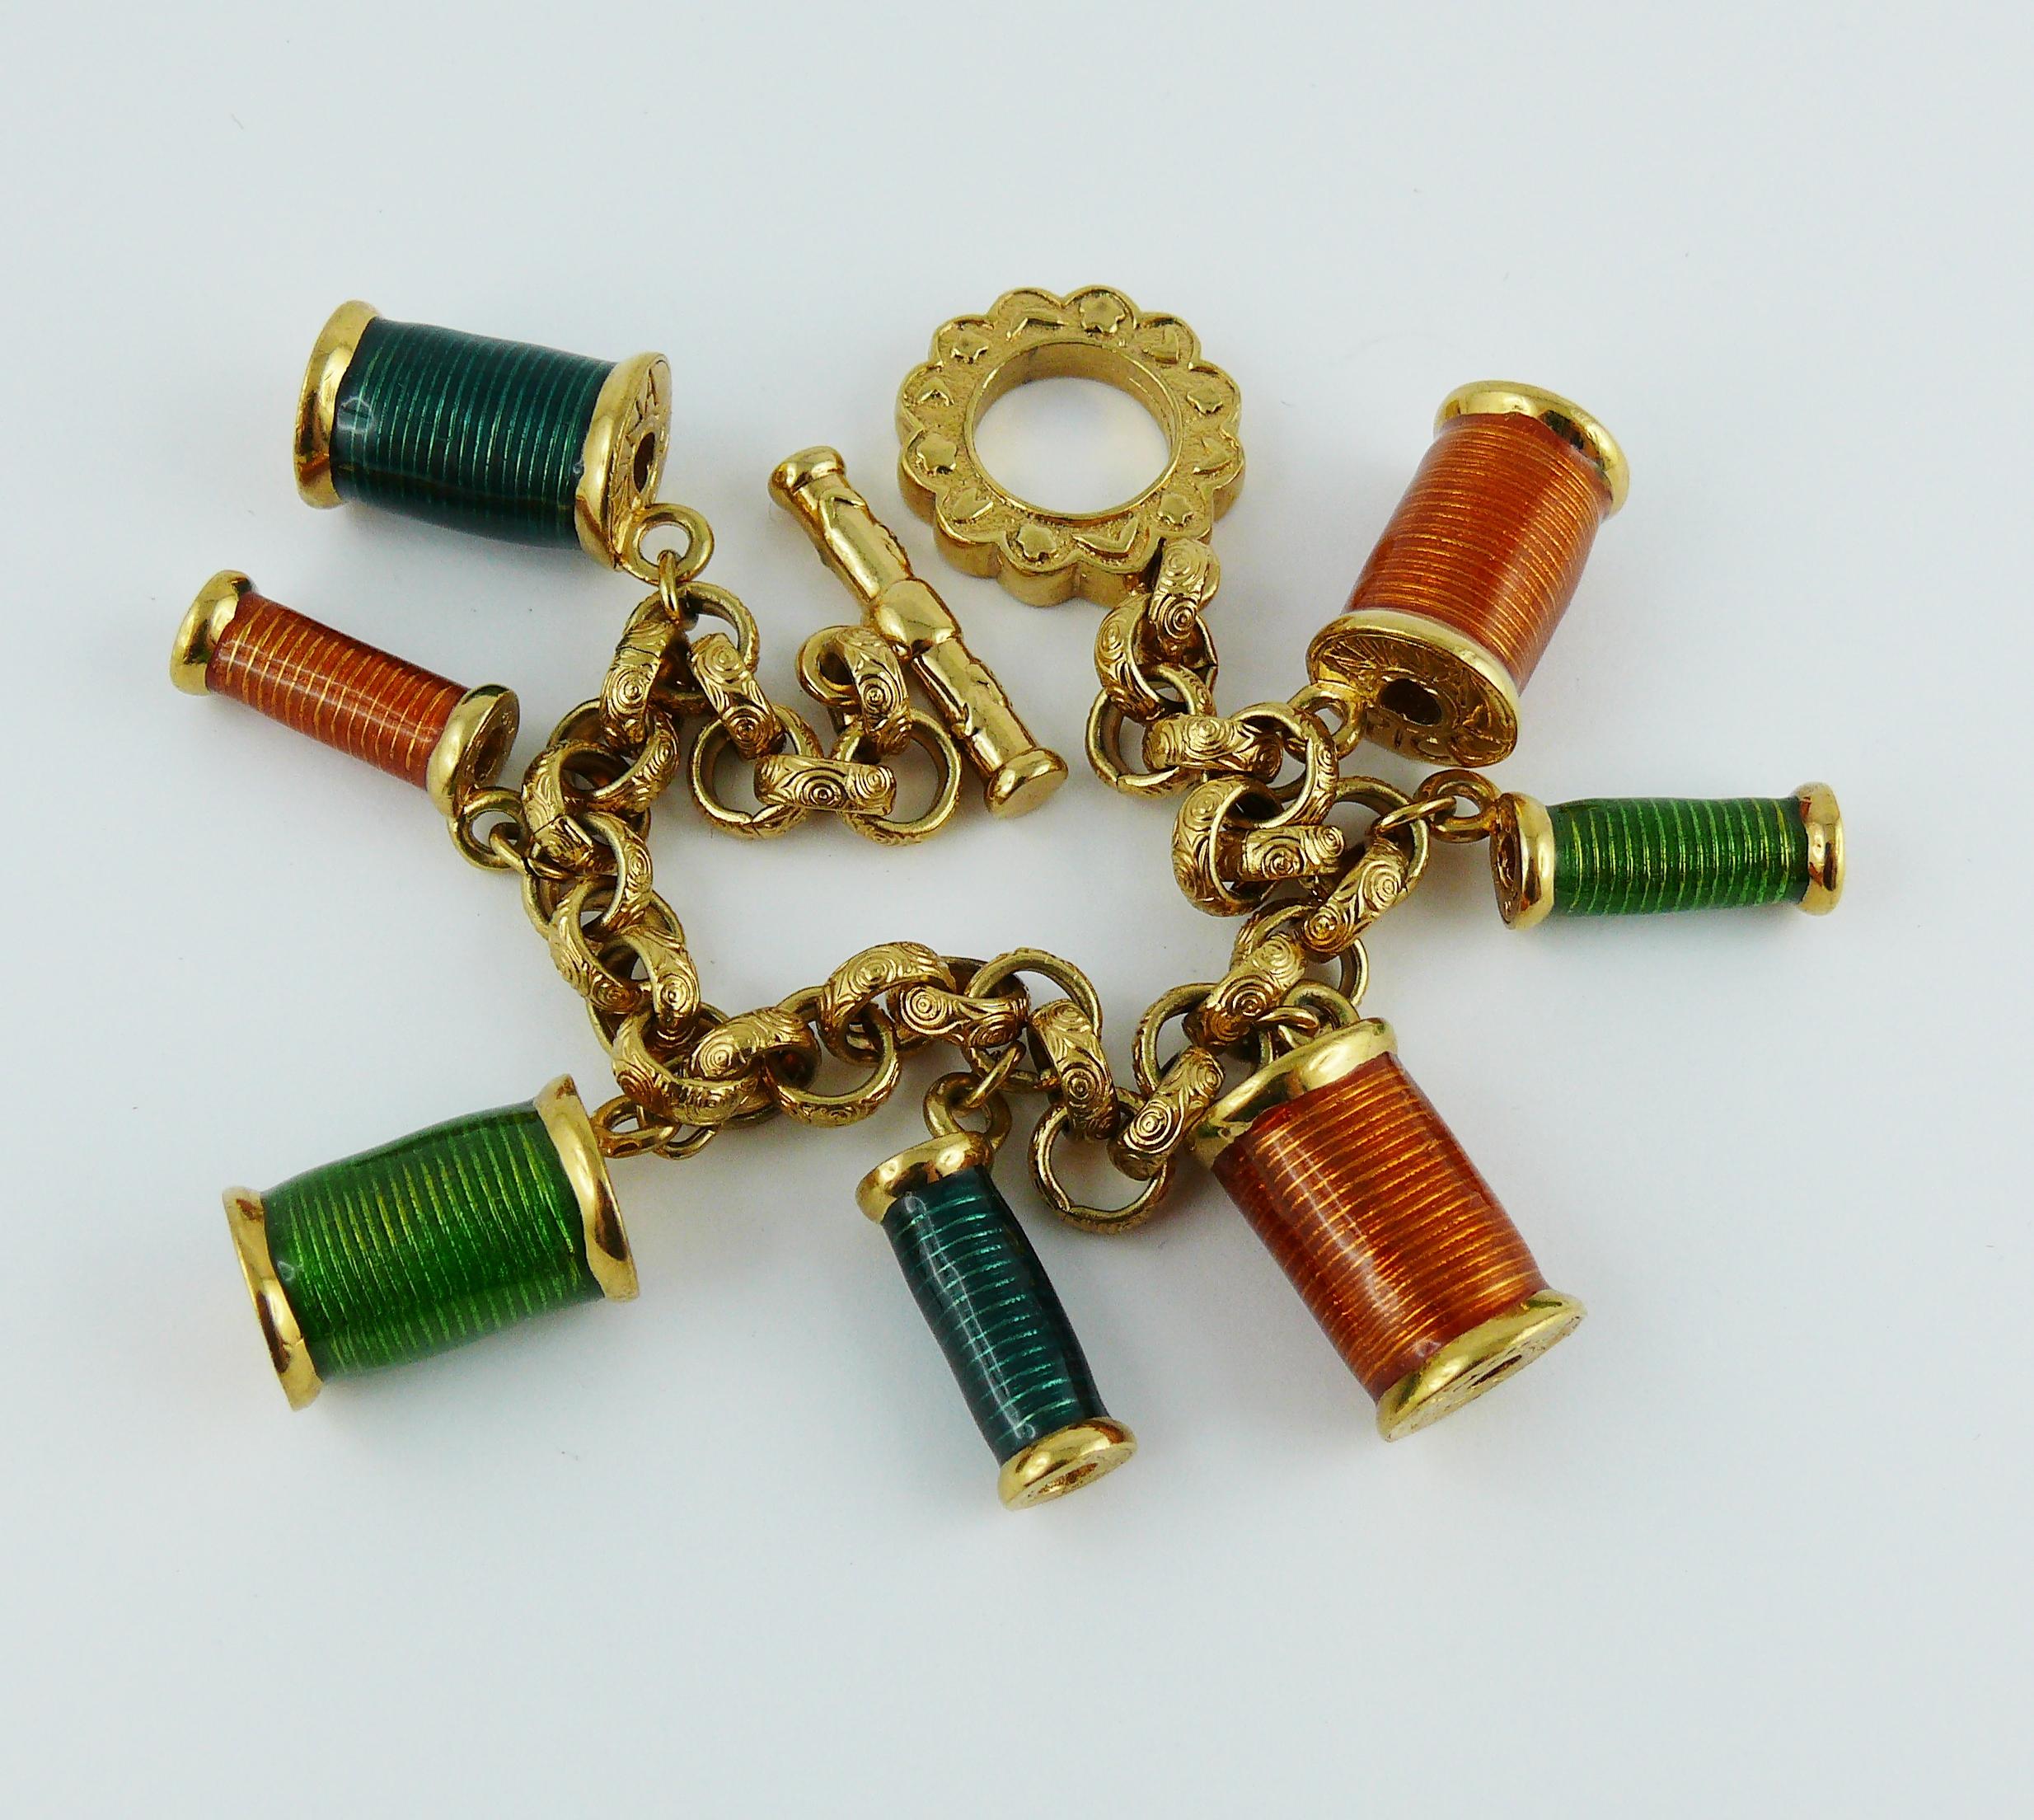 Nina Ricci Vintage Multicolored Sewing Thread Spool Charm Bracelet In Excellent Condition For Sale In Nice, FR